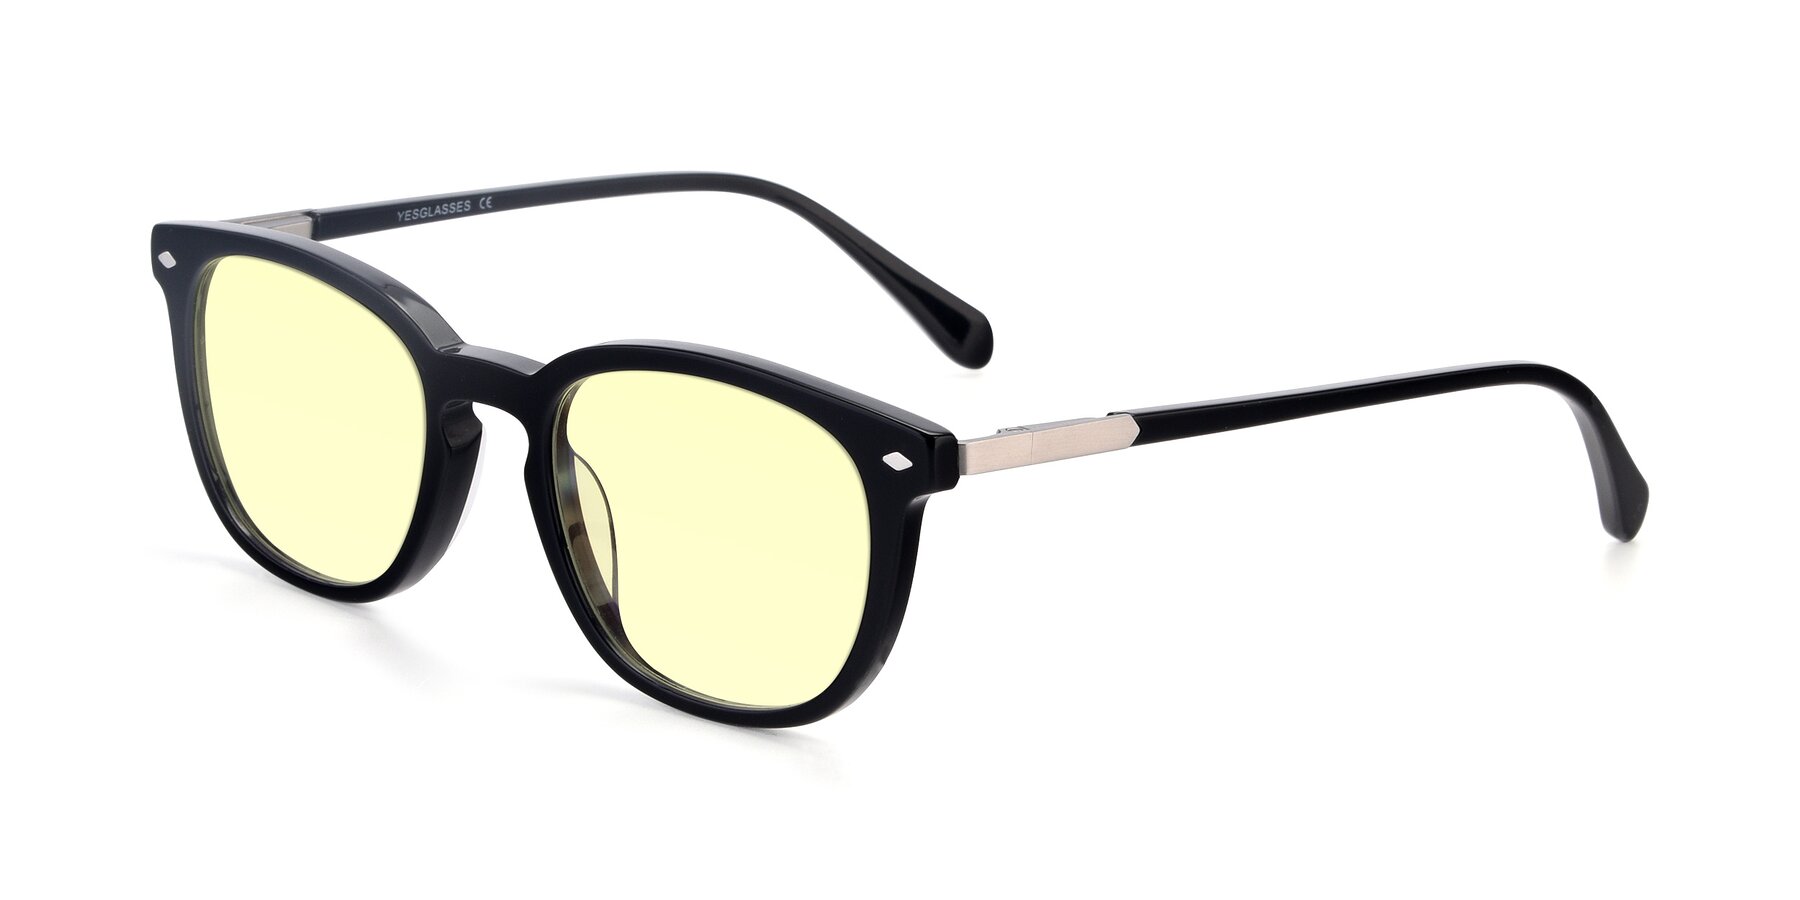 Angle of 17578 in Black with Light Yellow Tinted Lenses